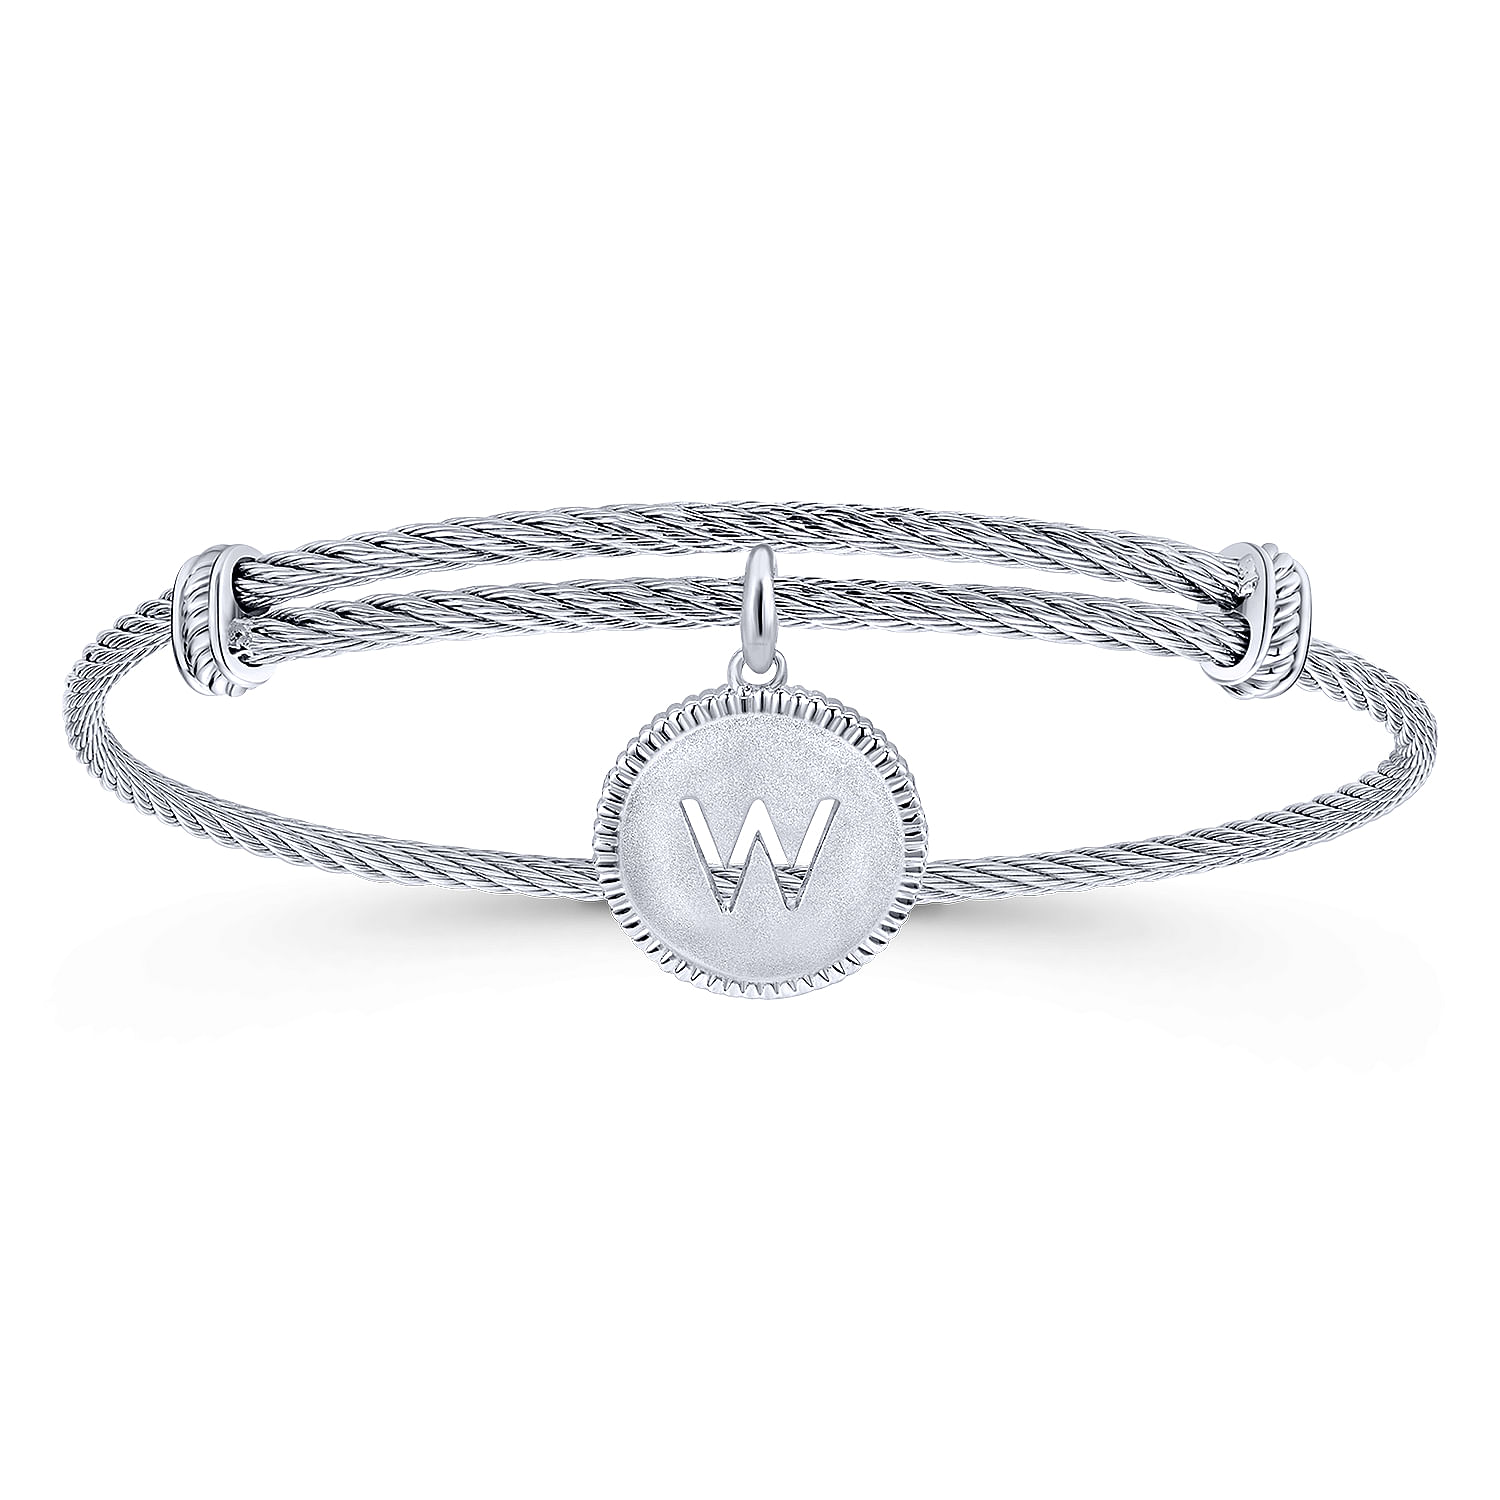 Adjustable Twisted Cable Stainless Steel Bangle with Sterling Silver W Initial Charm